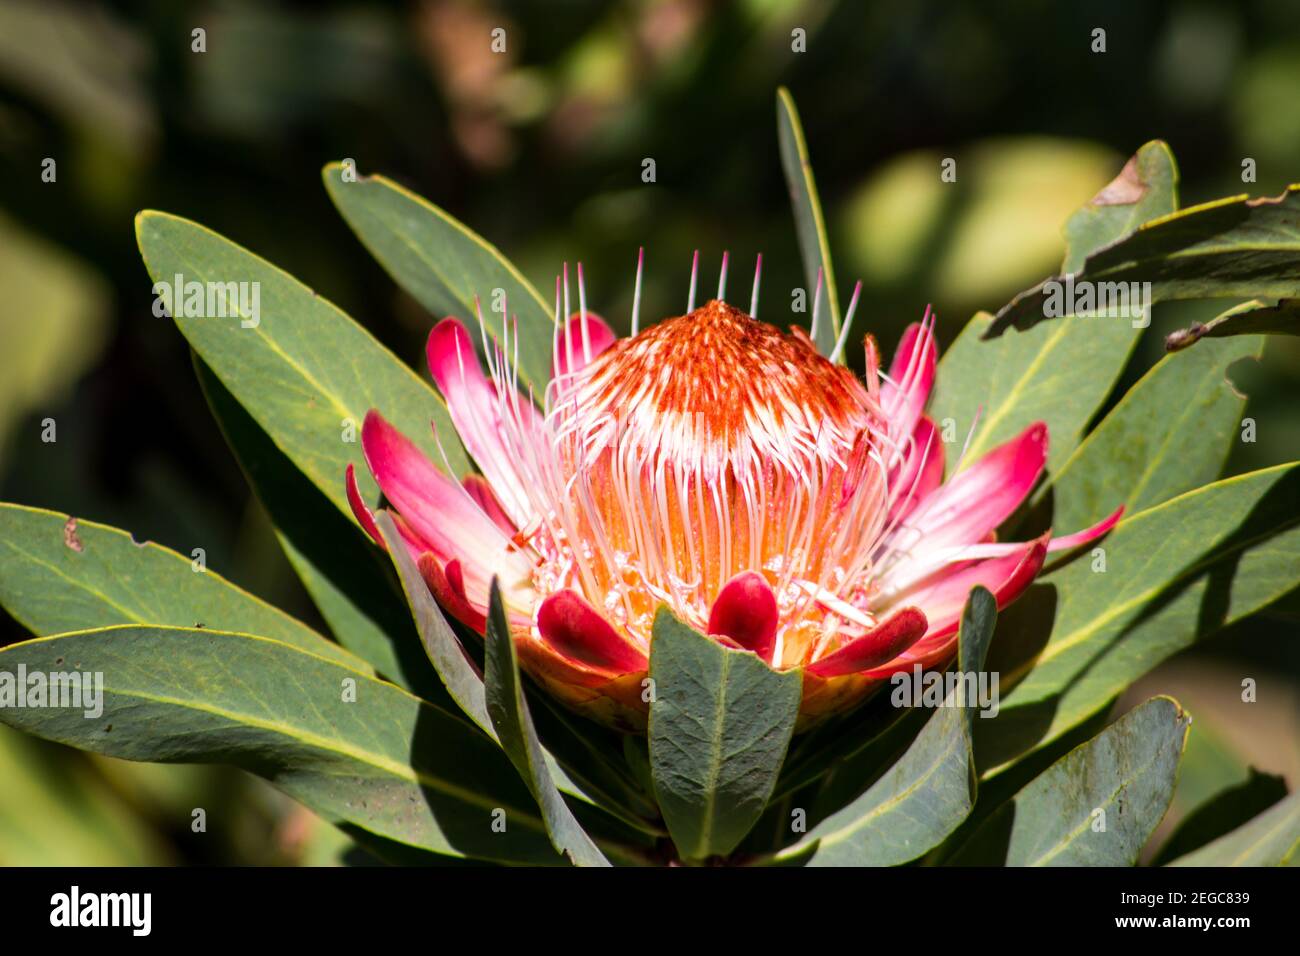 The Large Pink Flower of the Common Protea, Protea caffra, open and in full sunlight, in the central Drakensberg mountains, South Africa Stock Photo